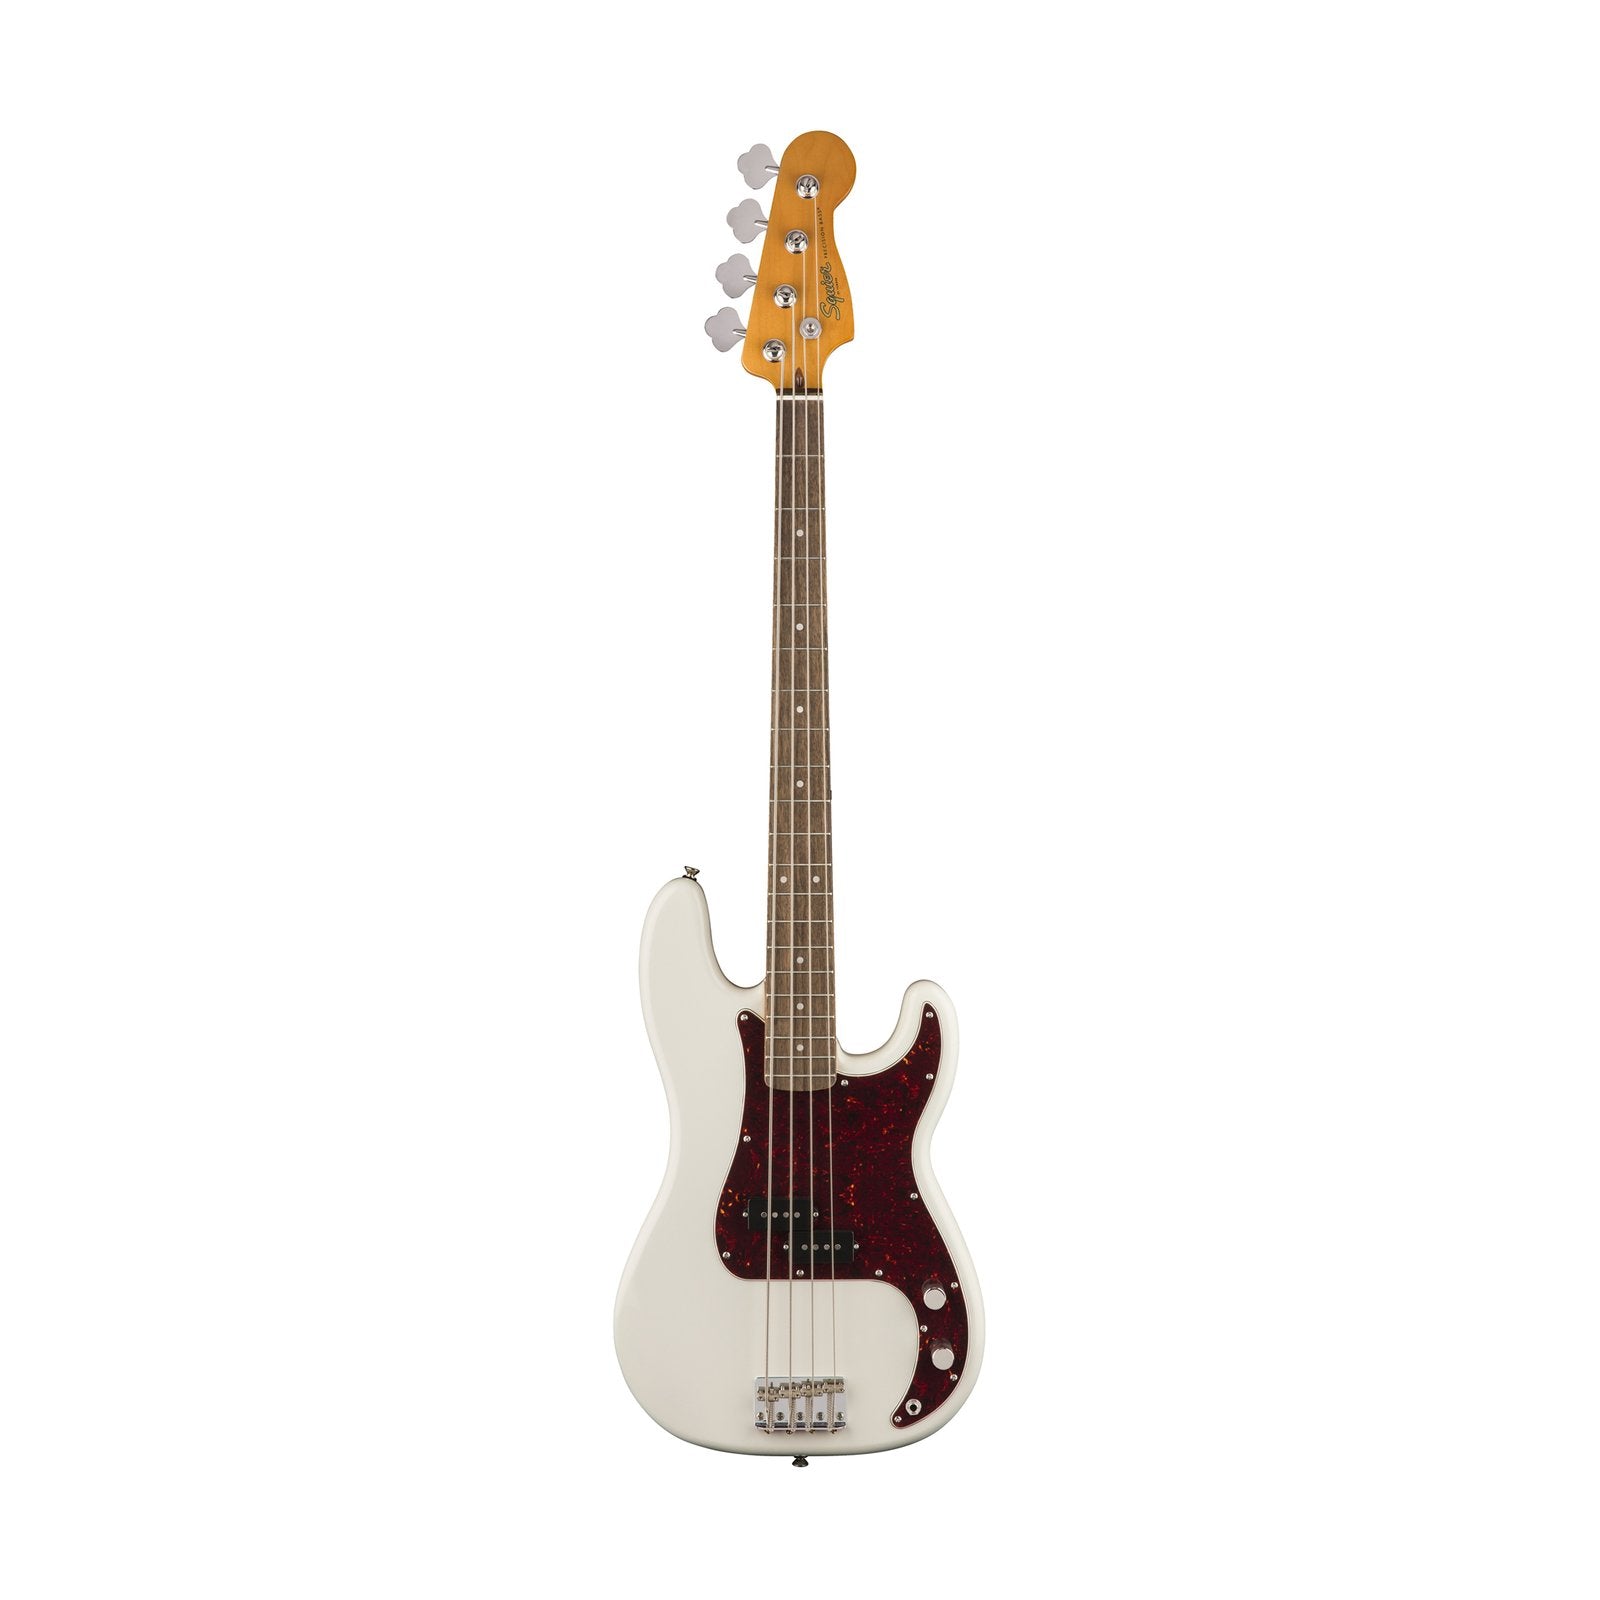 Squier Classic Vibe 60s Precision Bass Guitar, Laurel FB, Olympic White, SQUIER BY FENDER, BASS GUITAR, squier-by-fender-bass-guitar-037-4510-505, ZOSO MUSIC SDN BHD